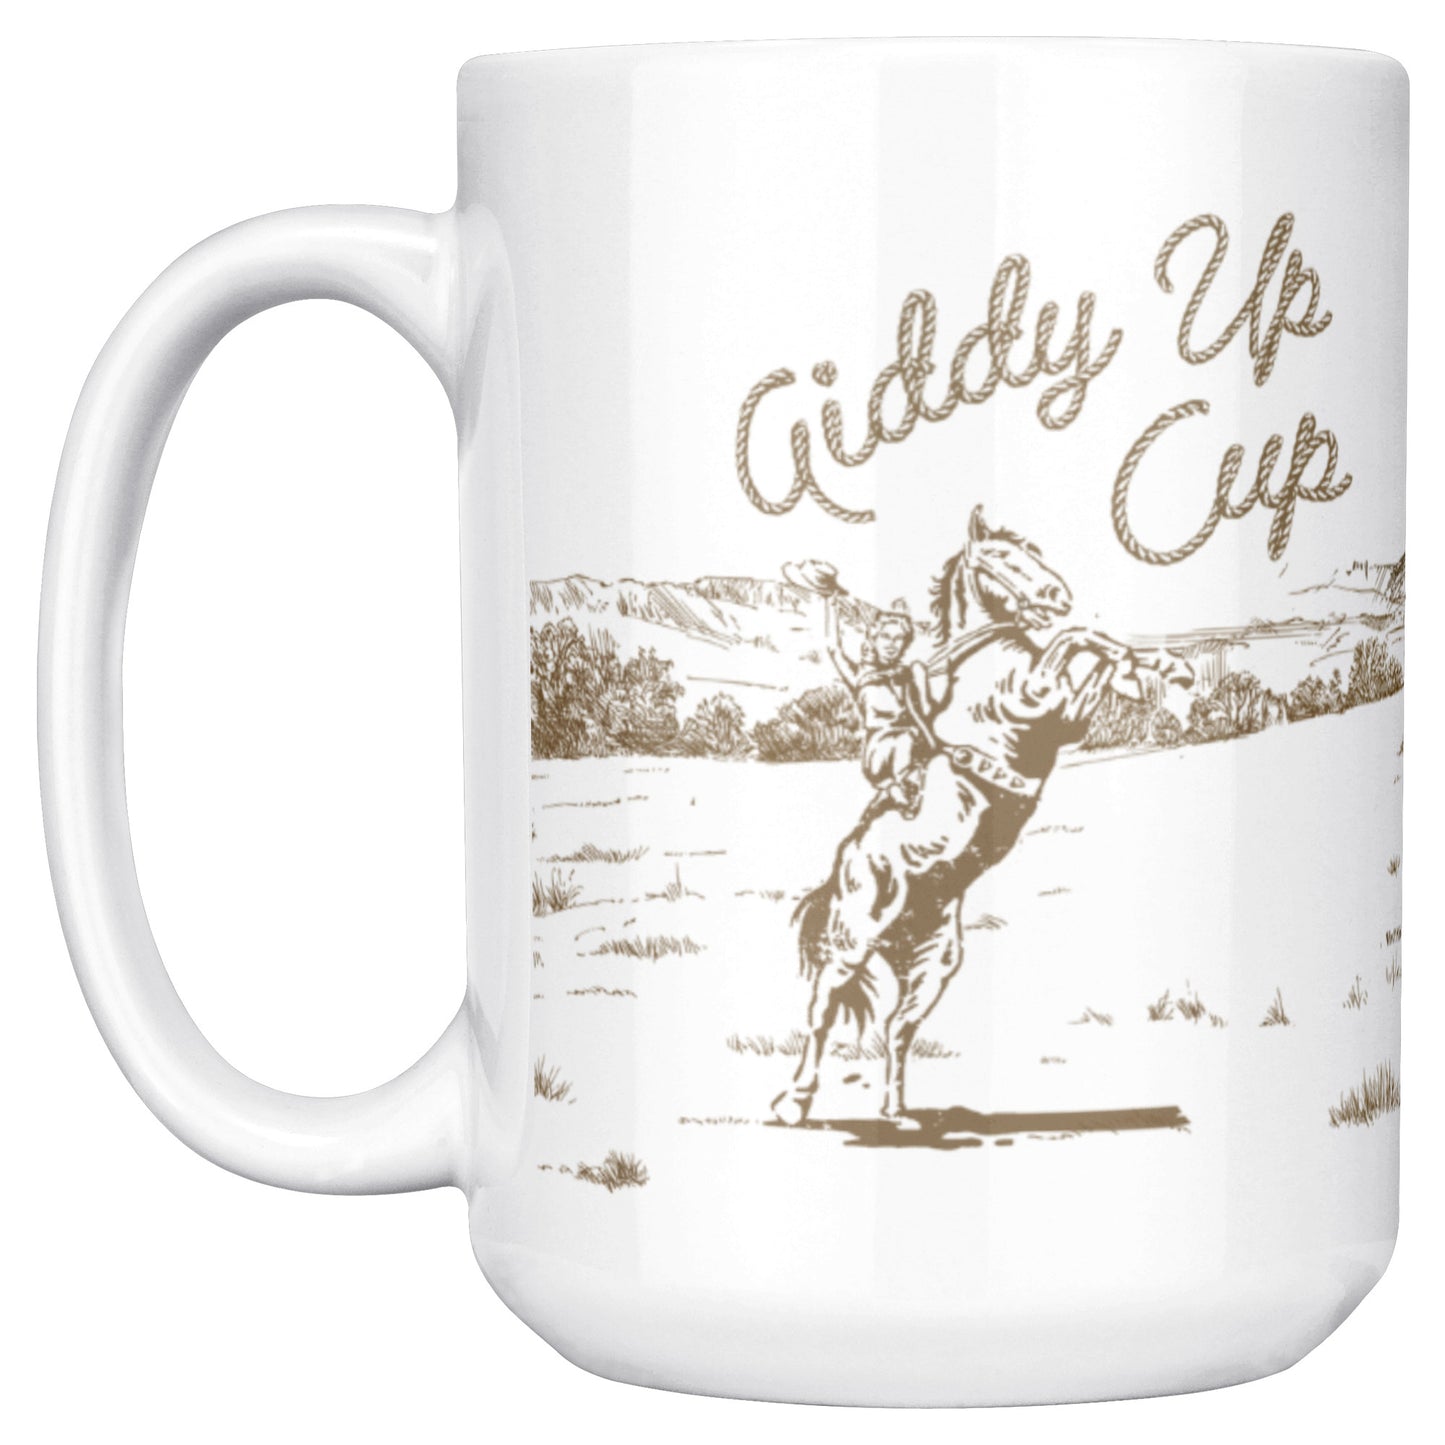 GIDDY UP CUP - BROWN + PINK